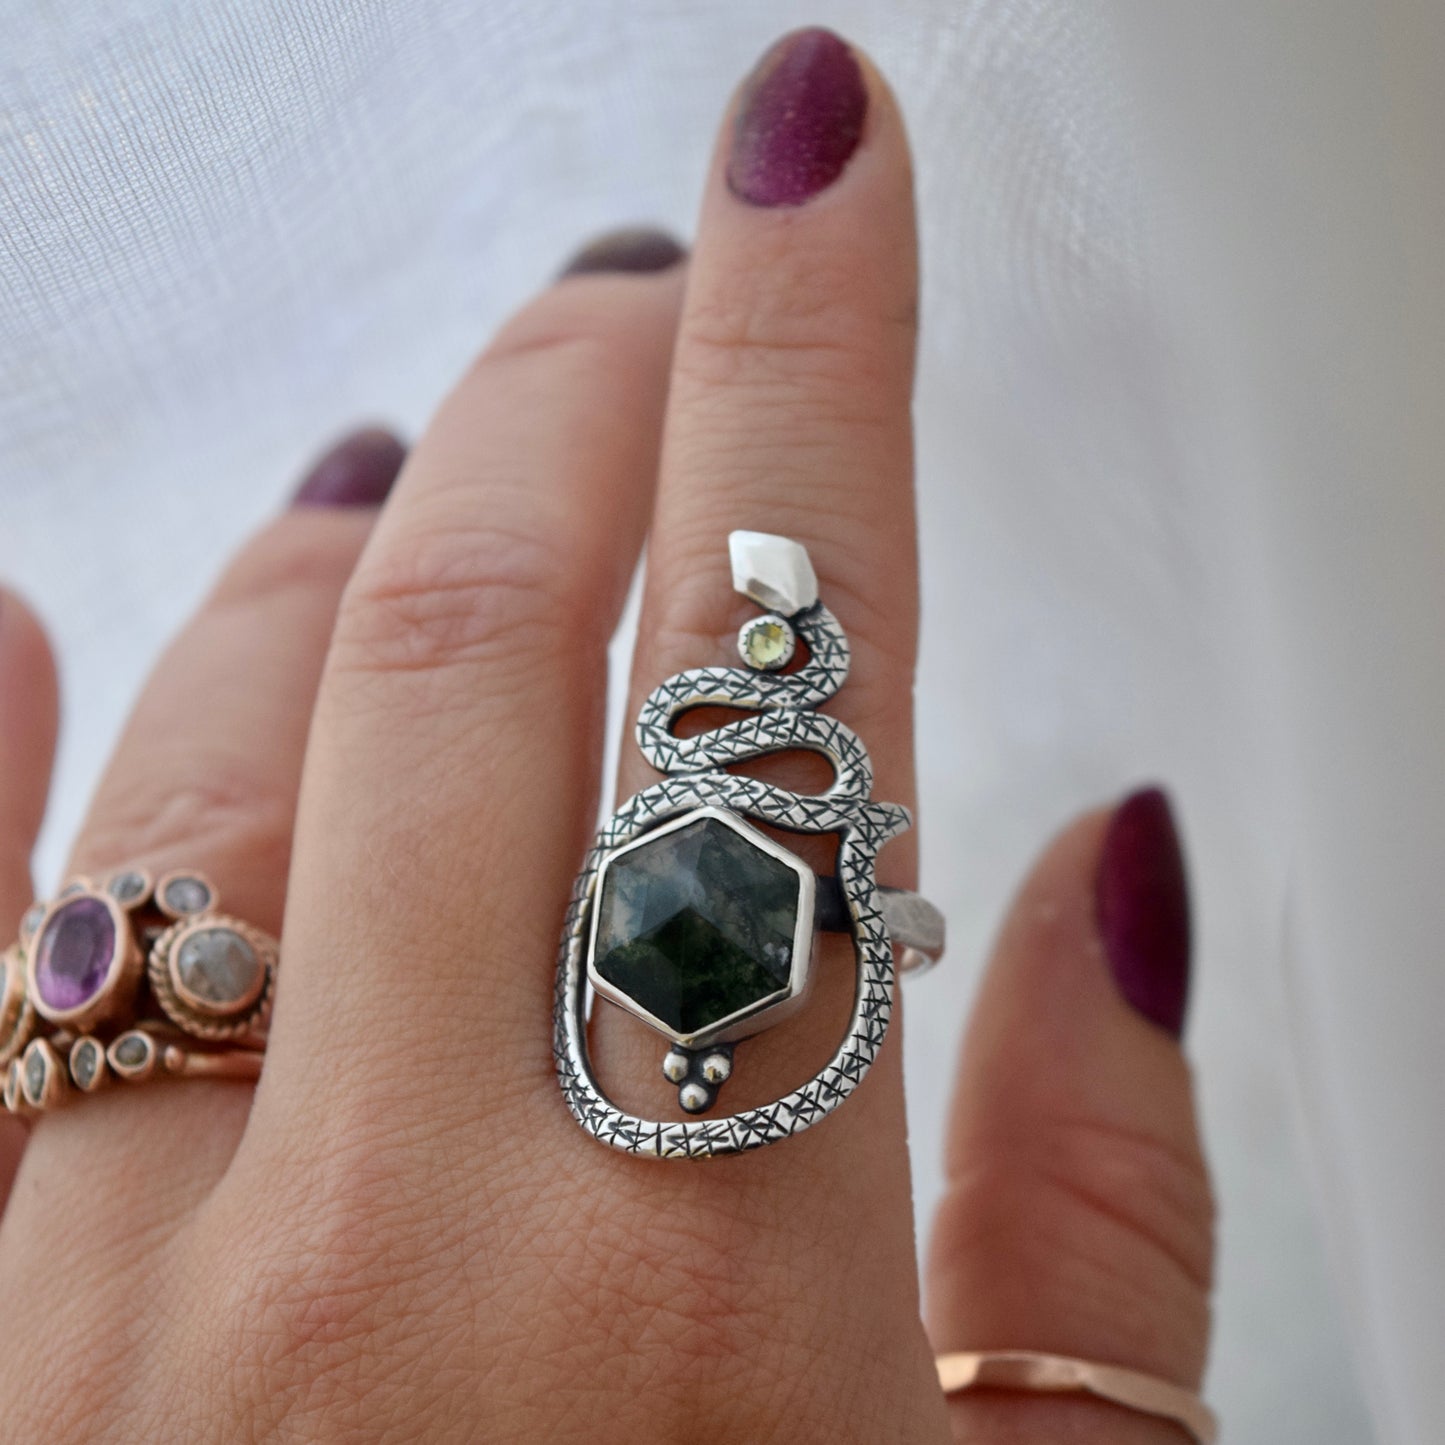 Serpent Ring with Moss Agate and Peridot size 10